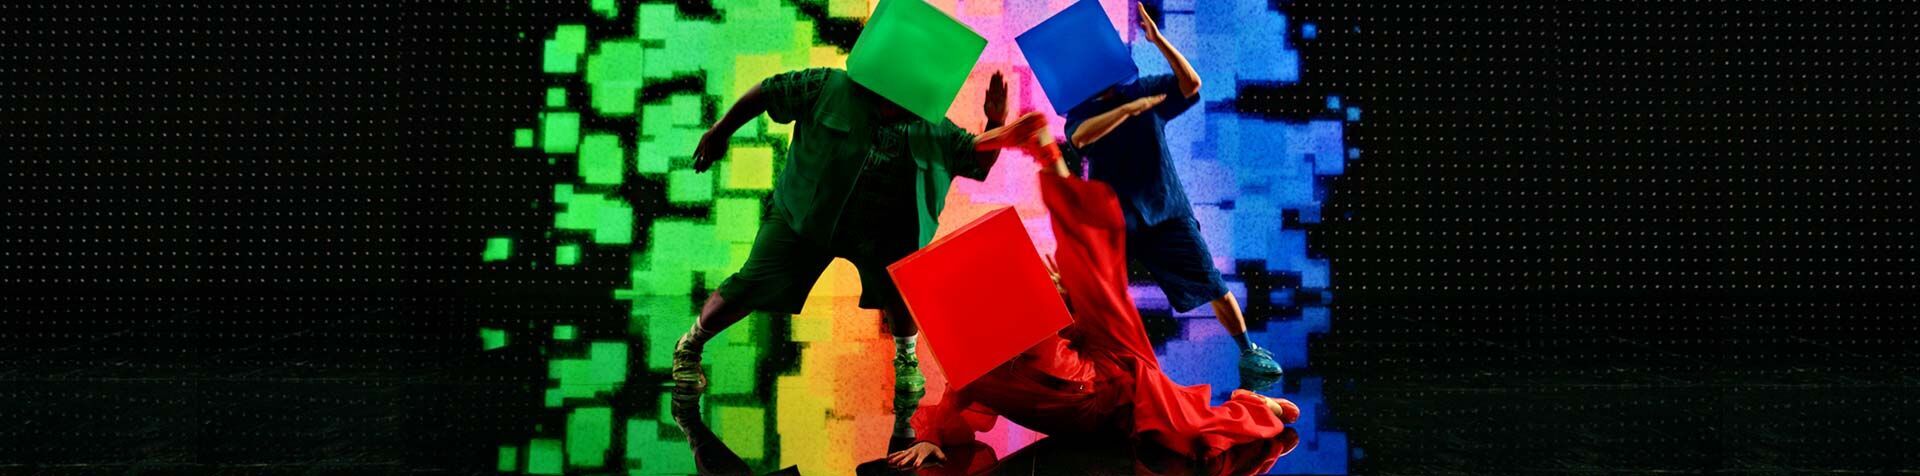 A still of the intro sequence in the "Pixel by Pixel" film depicting a green pixel dancer and red pixel dancer, each with an LED-cube on their head, against a black background.